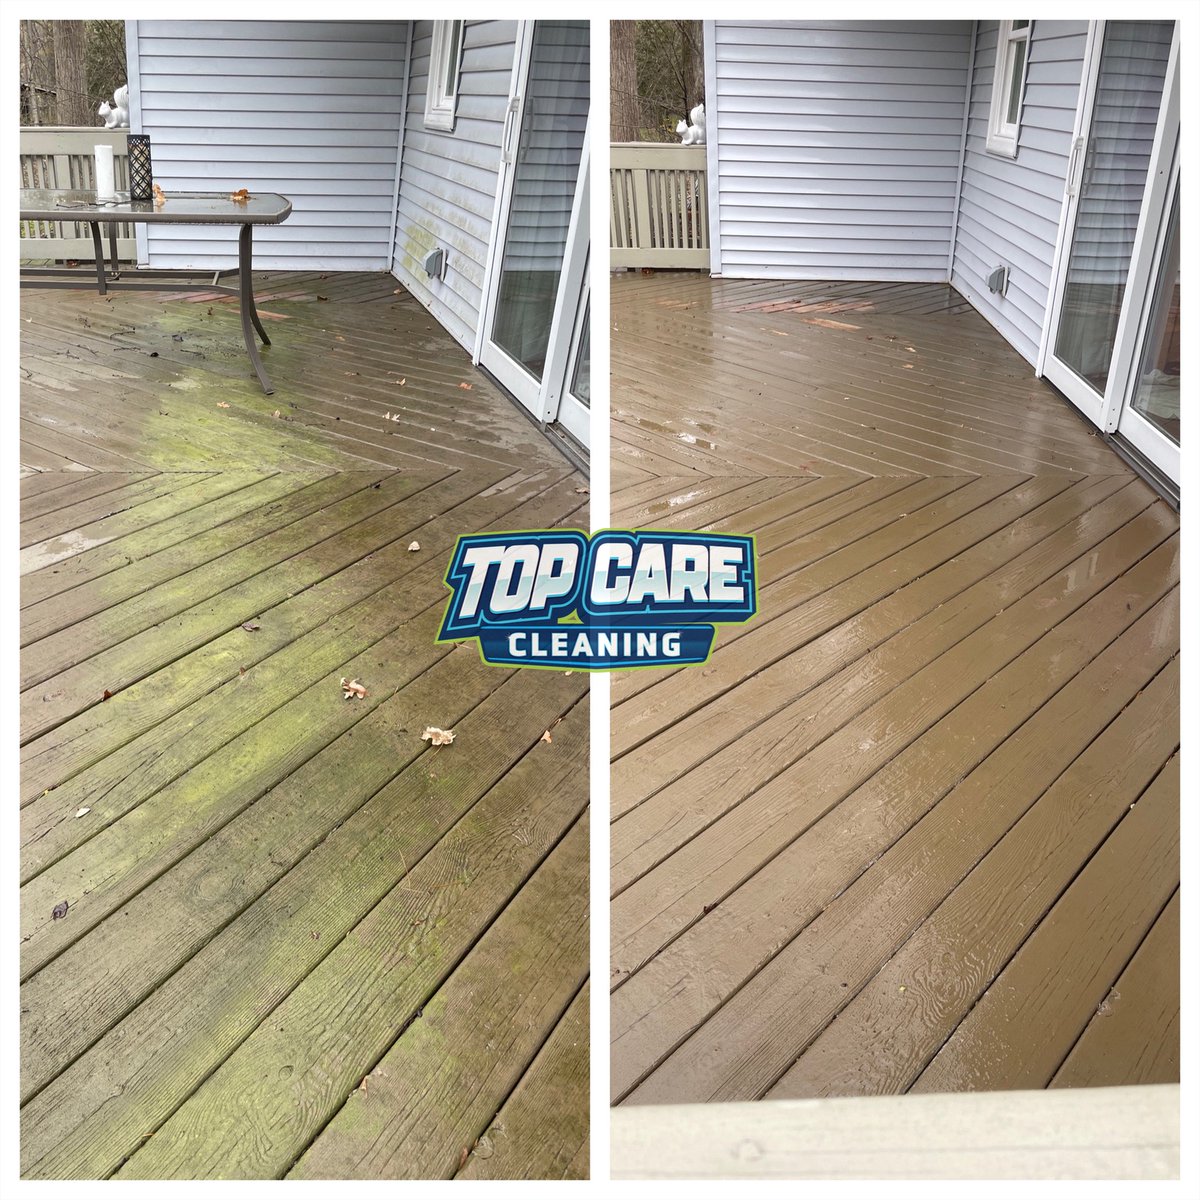 Considering replacing your mouldy deck? Maybe all it needs is a good cleaning! Get a free estimate when you call (616) 530-9129!